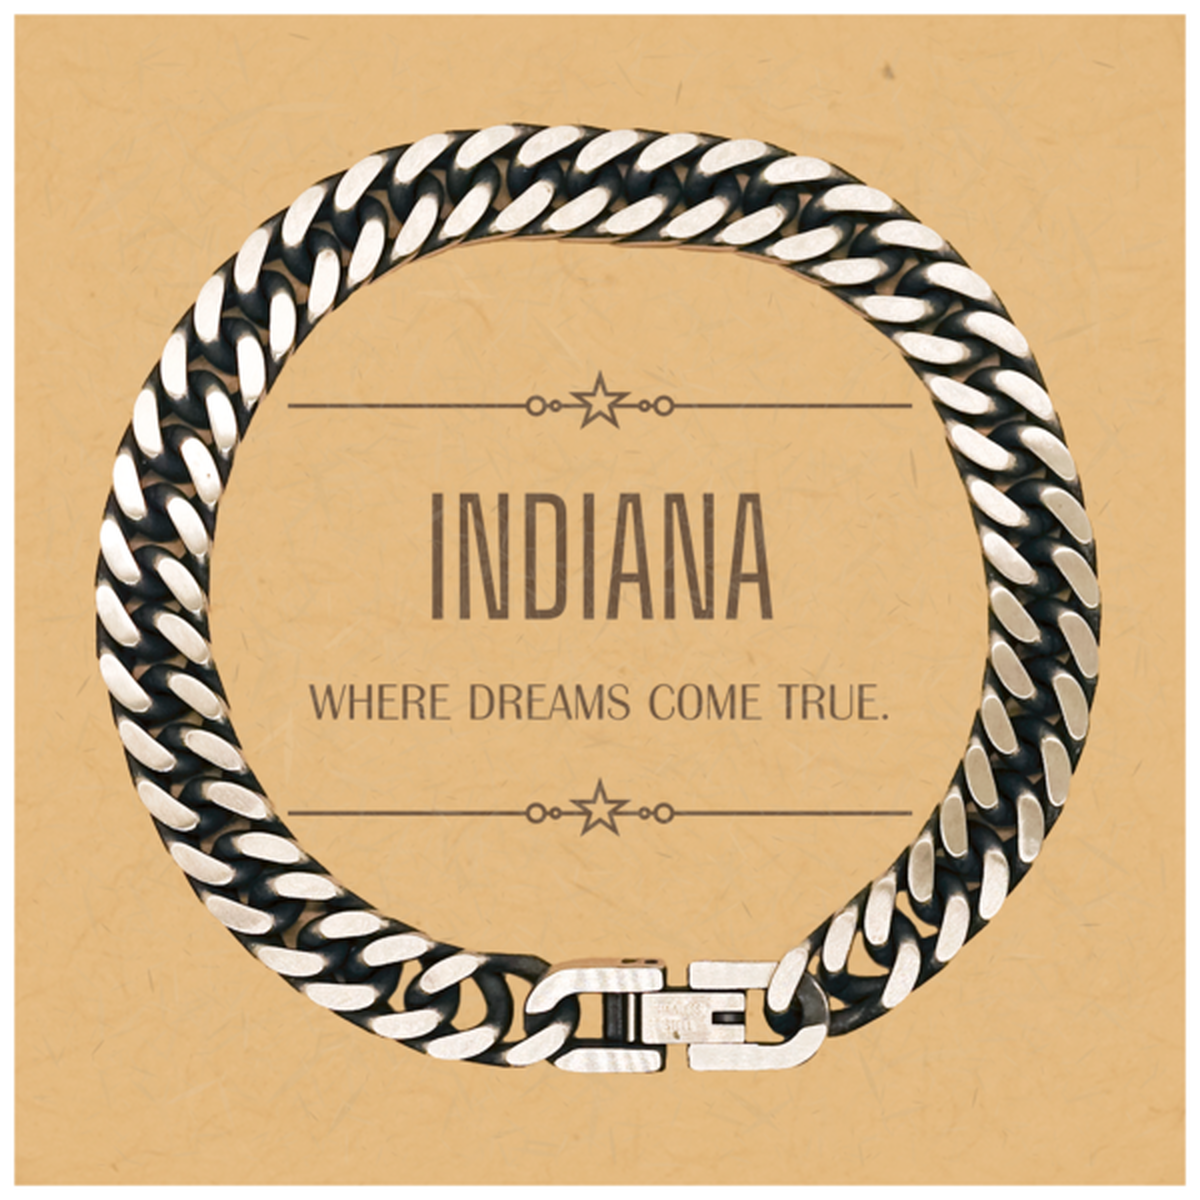 Love Indiana State Cuban Link Chain Bracelet, Indiana Where dreams come true, Birthday Christmas Inspirational Gifts For Indiana Men, Women, Friends